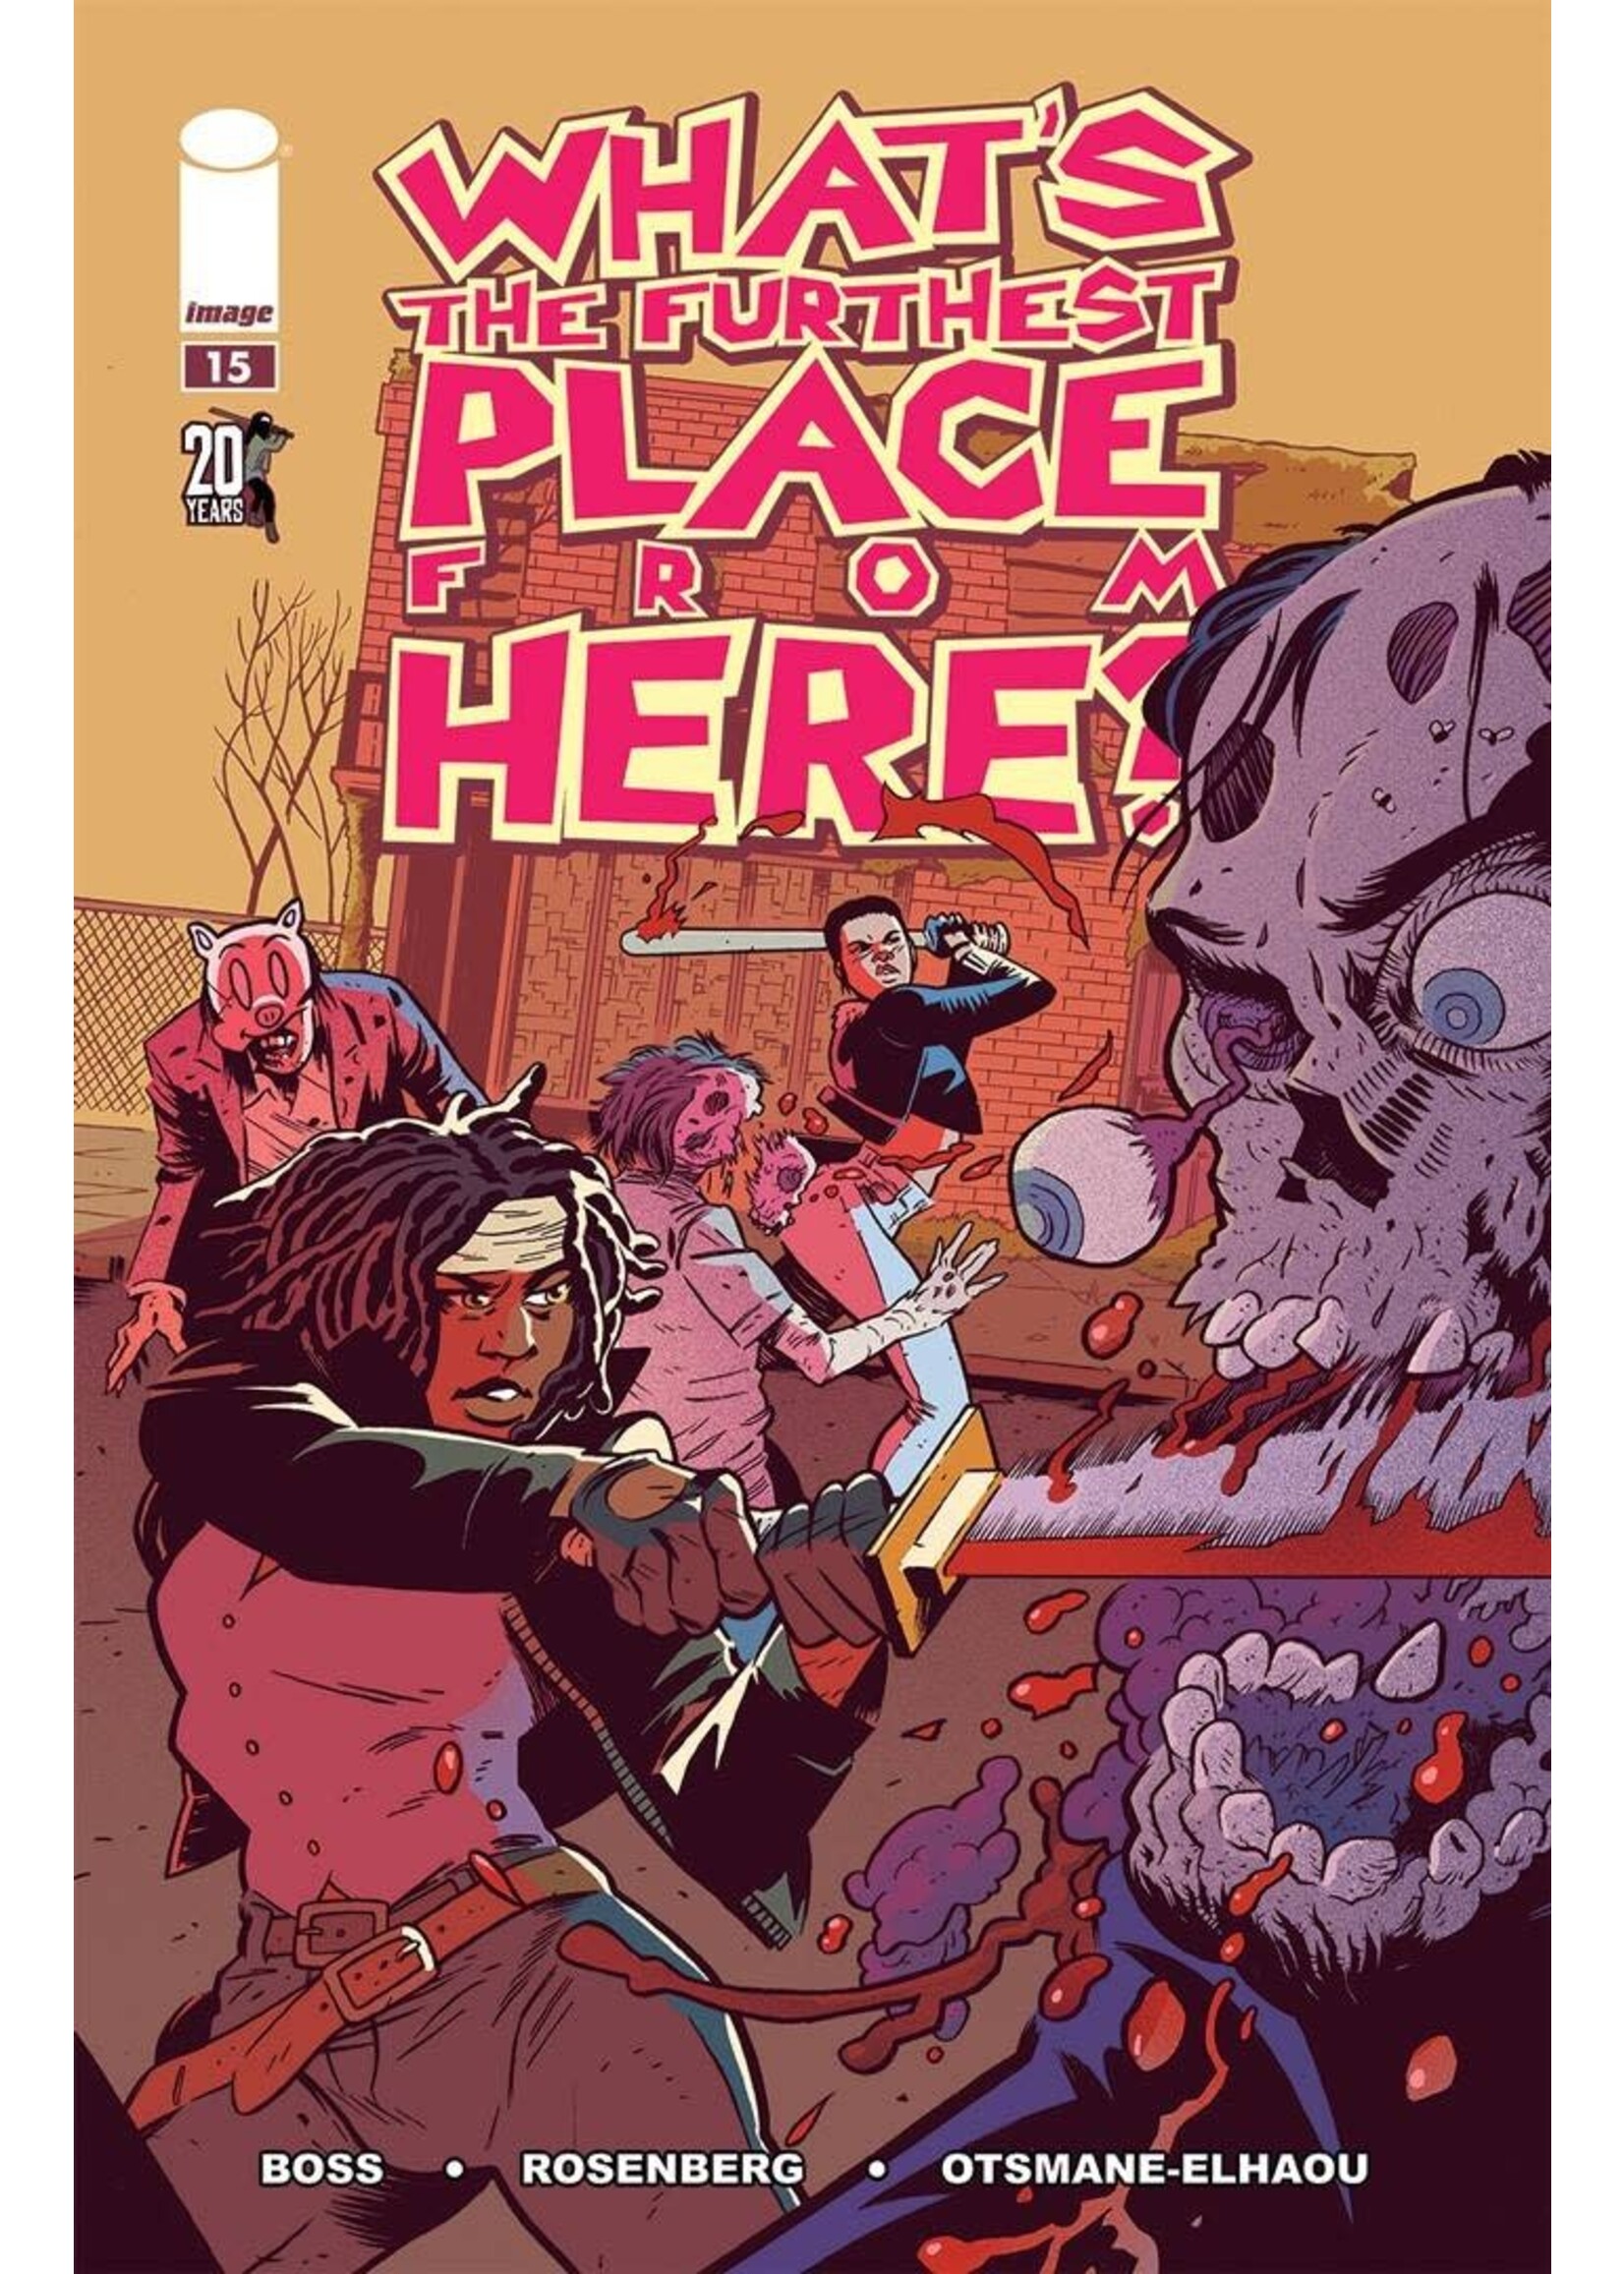 IMAGE COMICS WHATS THE FURTHEST PLACE FROM HERE #15 CVR C TWD 20TH ANNV